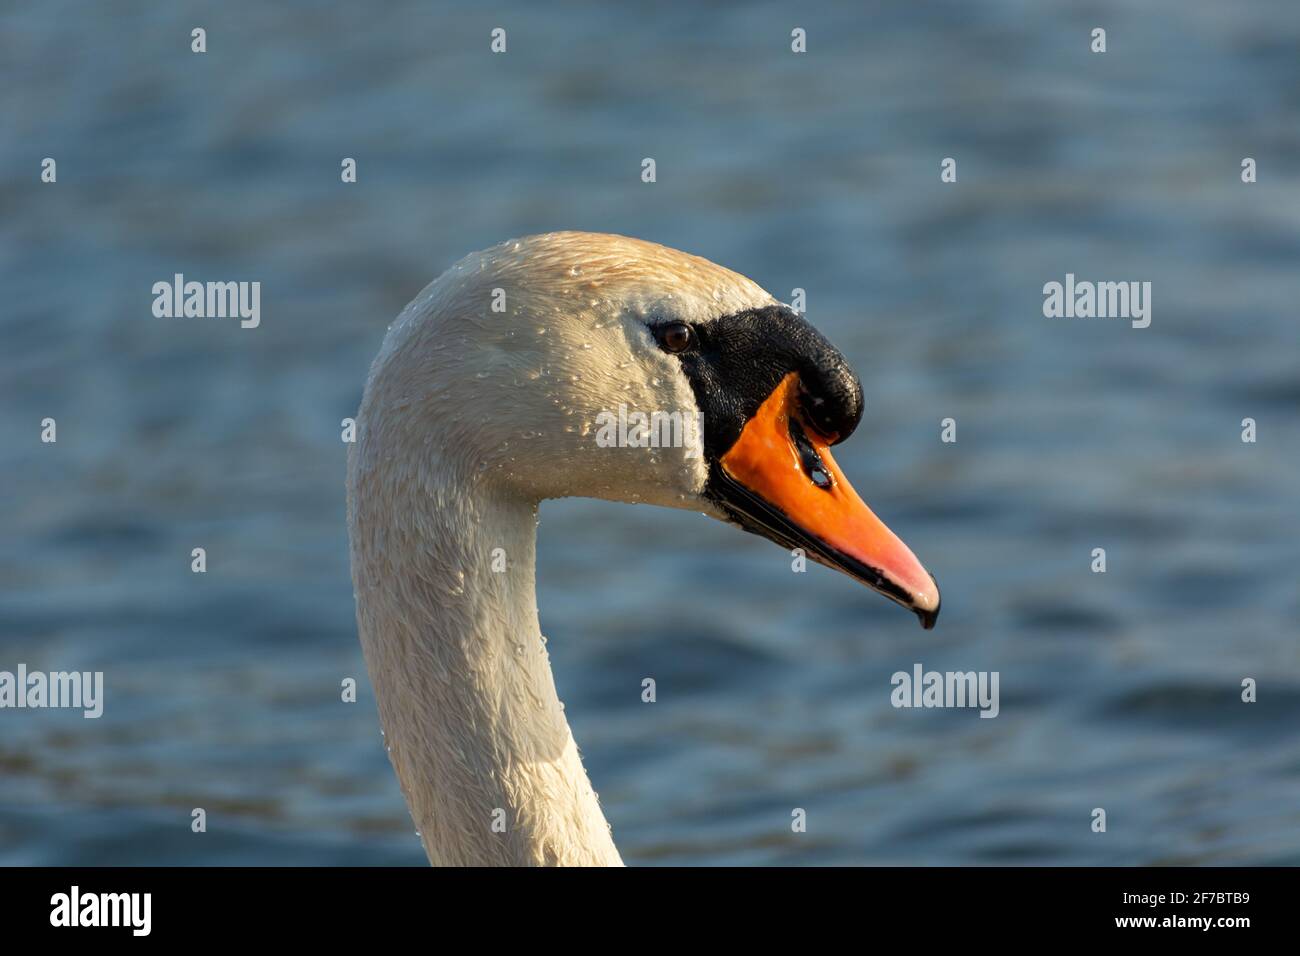 Head of a mute swan with water droplets on its feathers Stock Photo